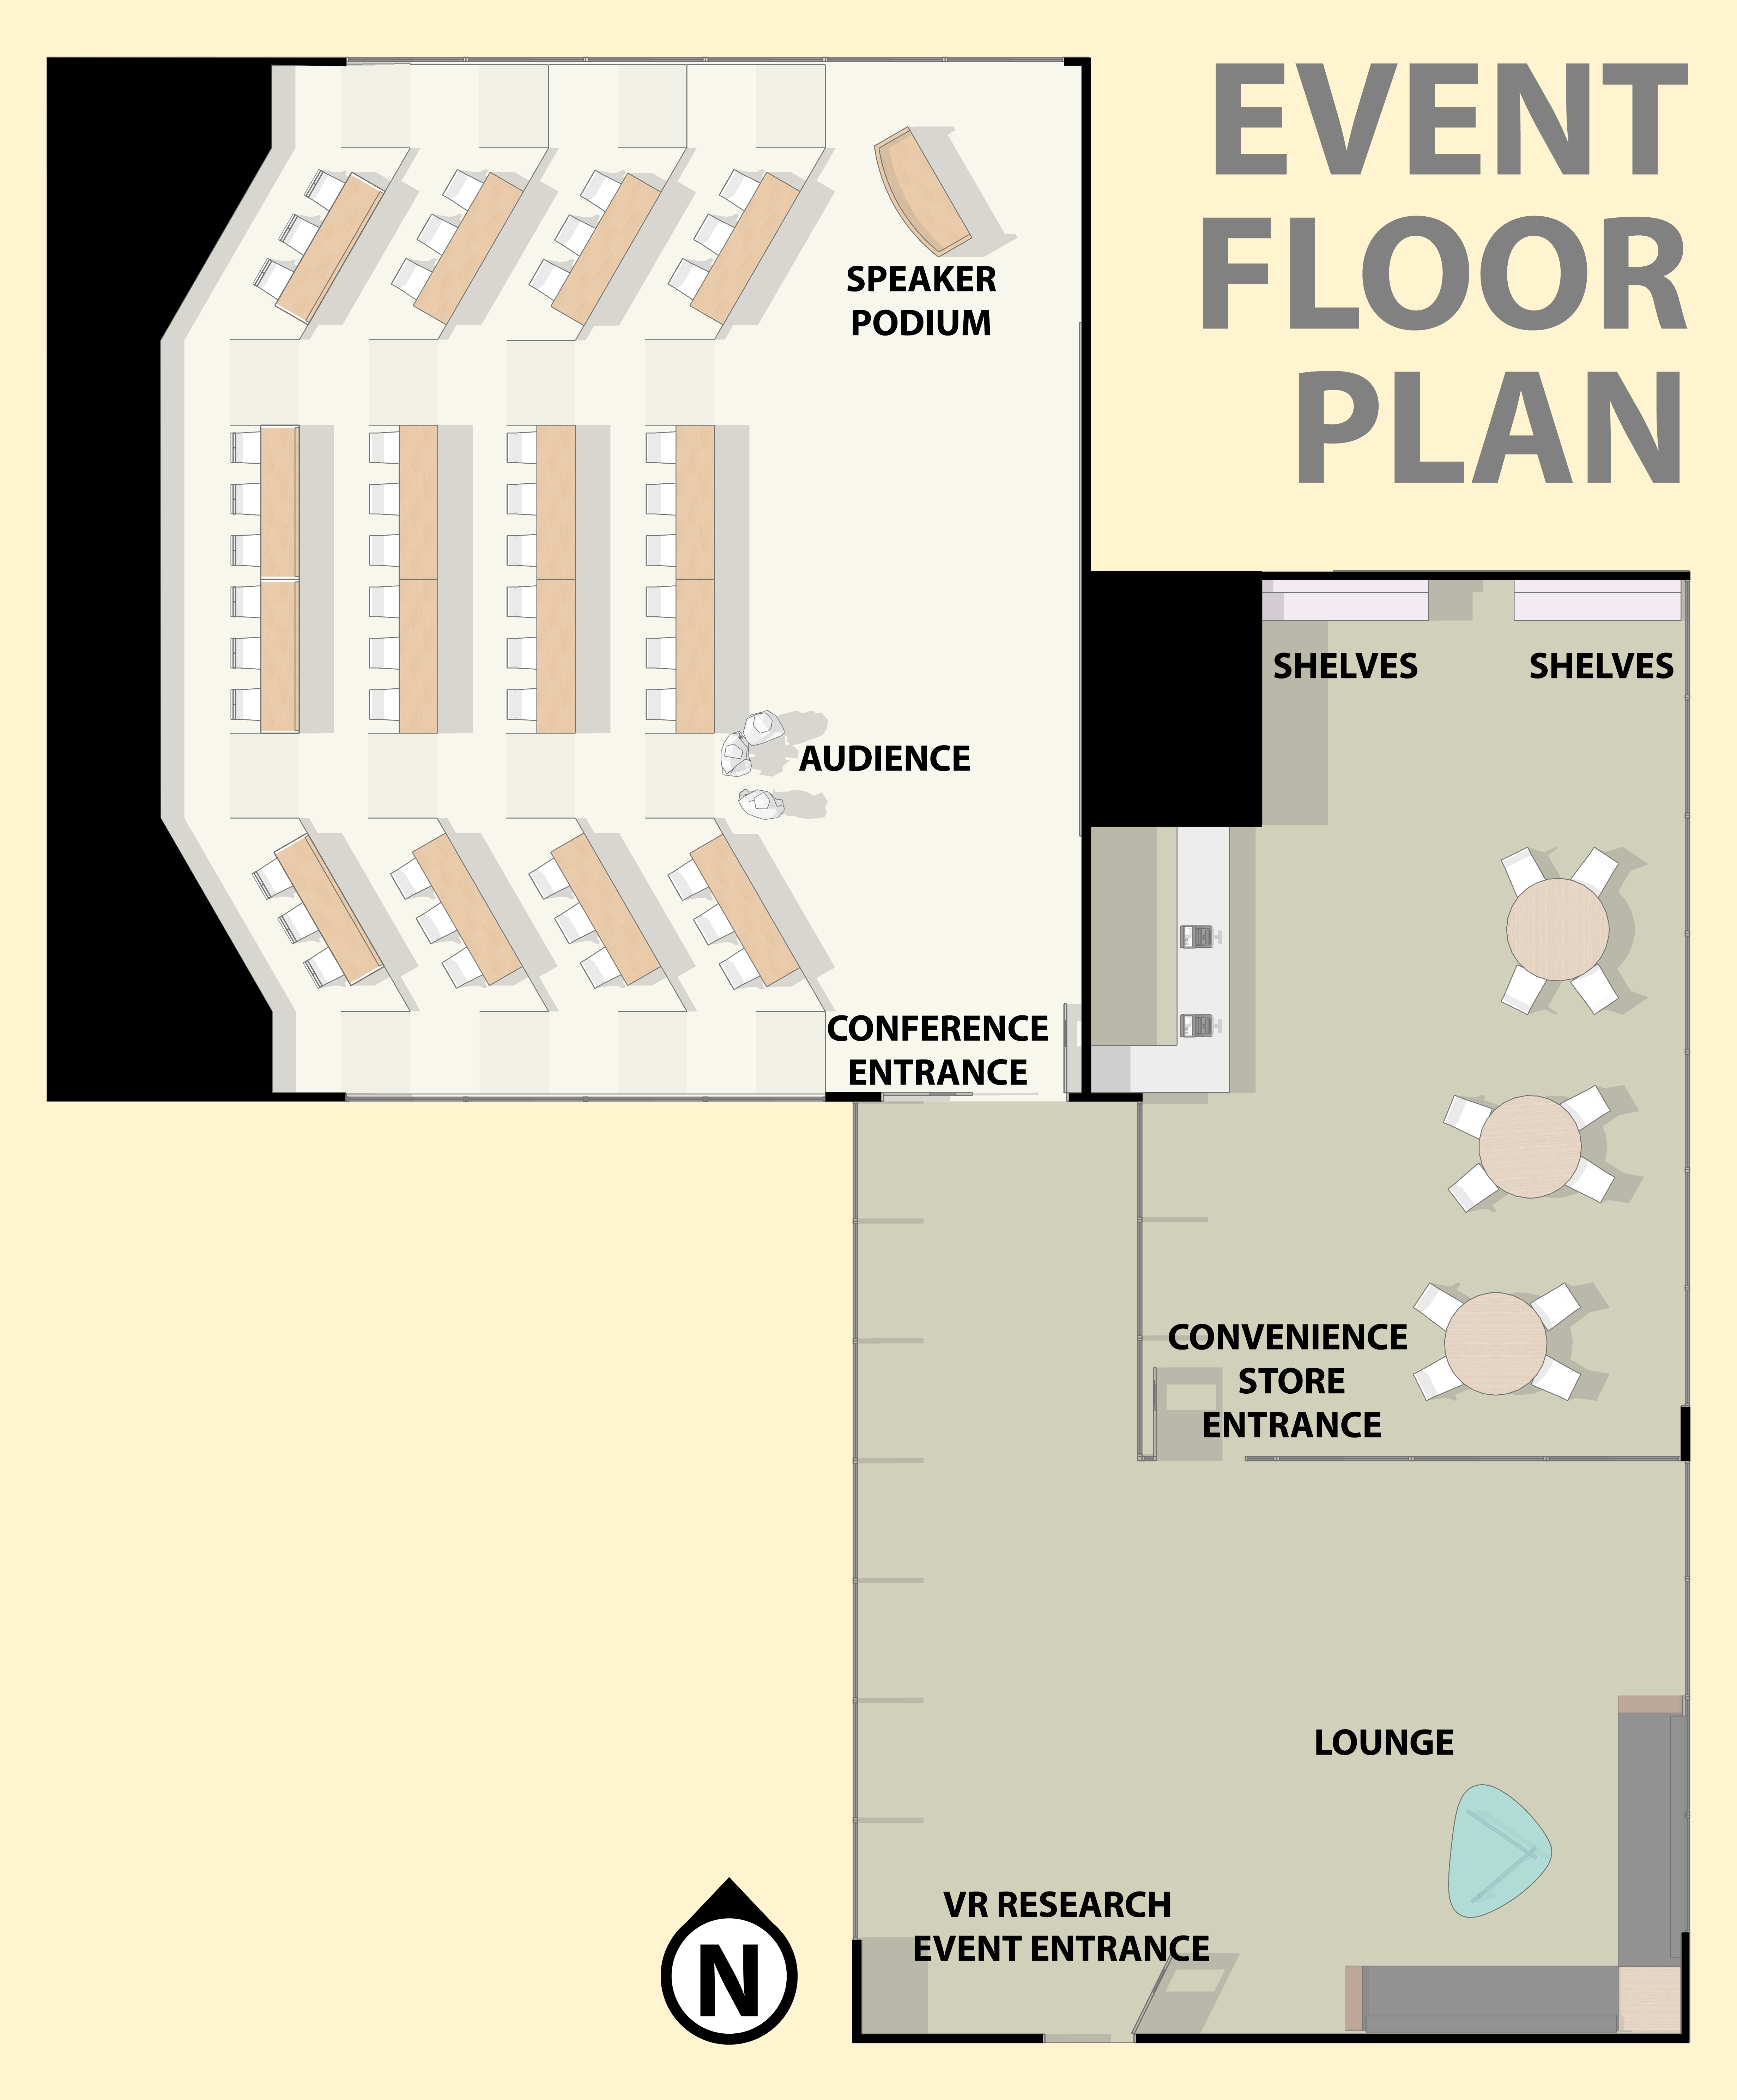 Event floor plan showing event entrance, lounge, and convenience store areas.